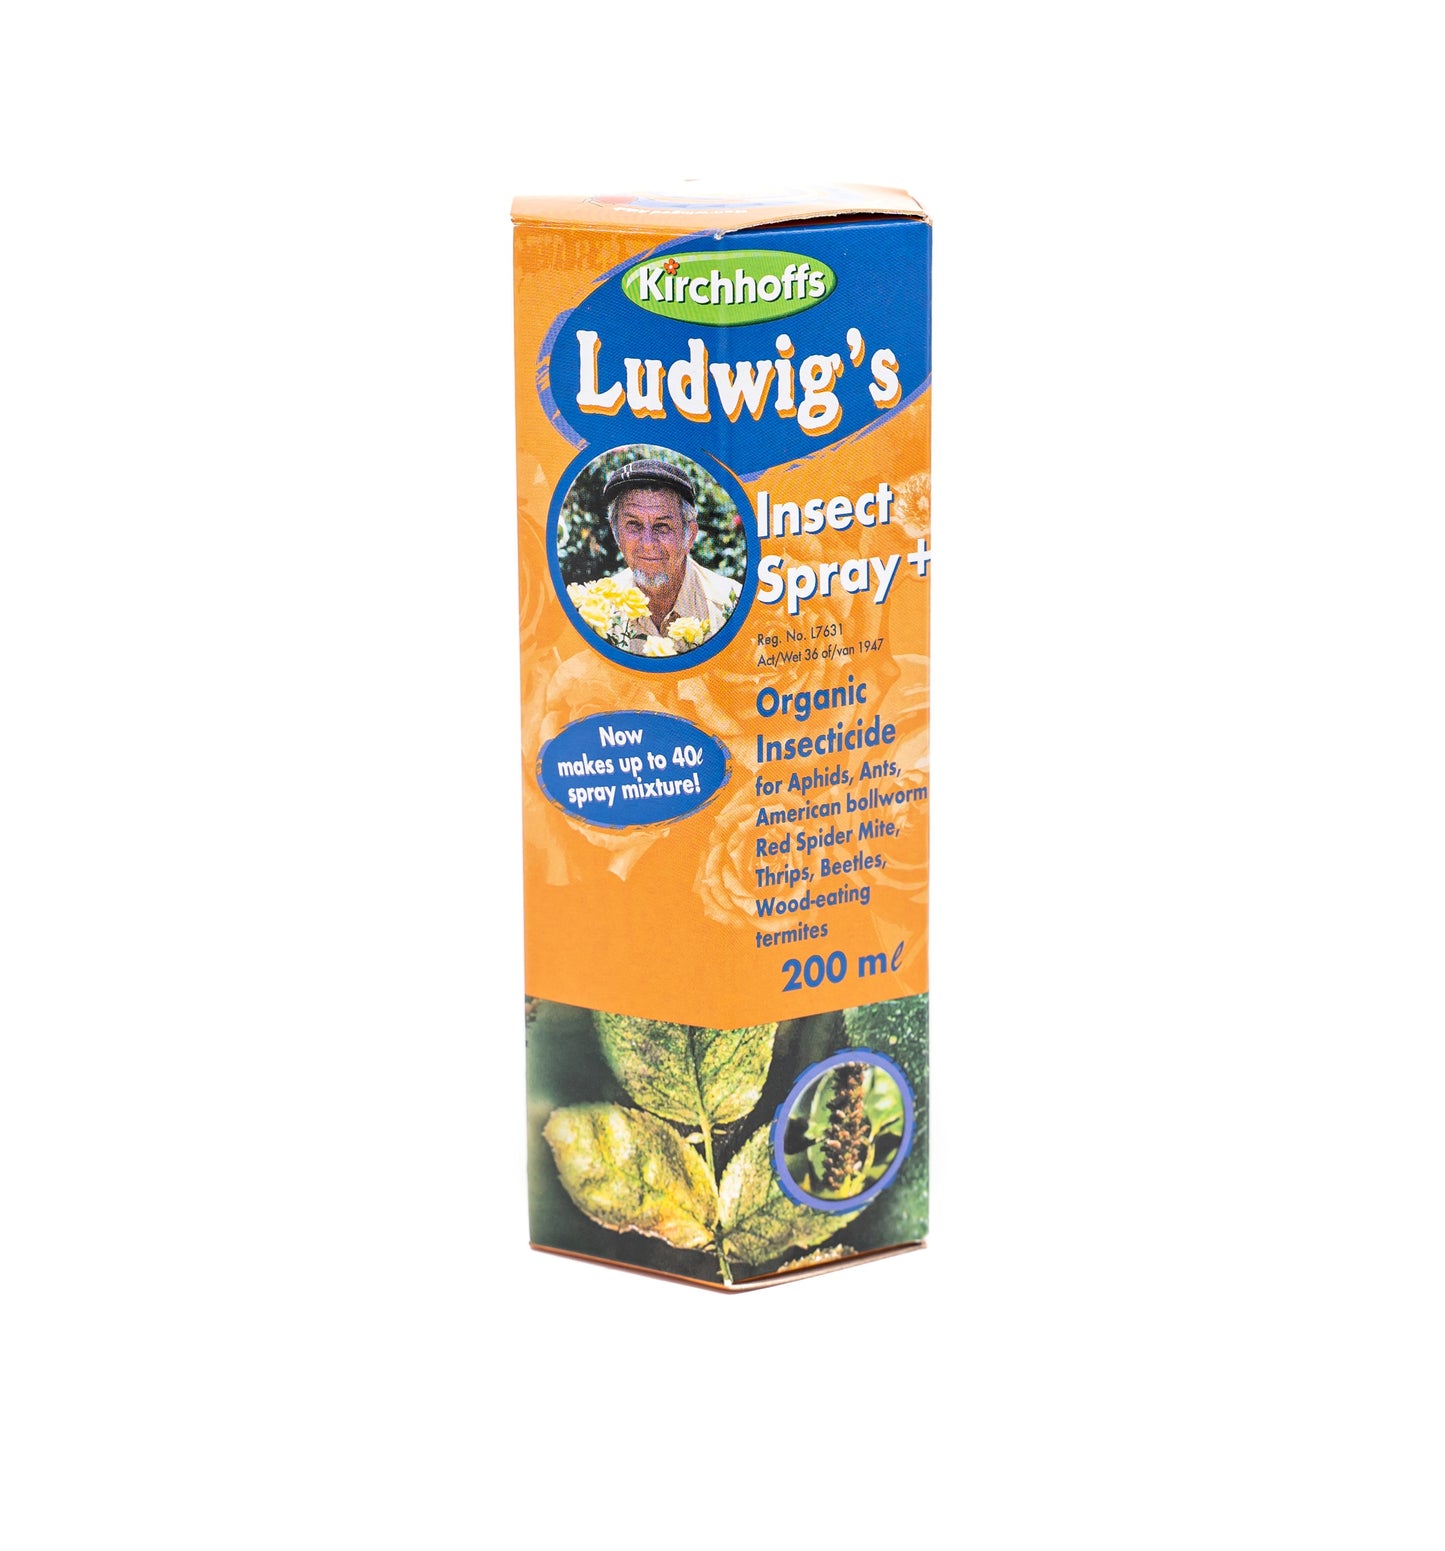 Ludwig's Insect Spray Plus Insecticide